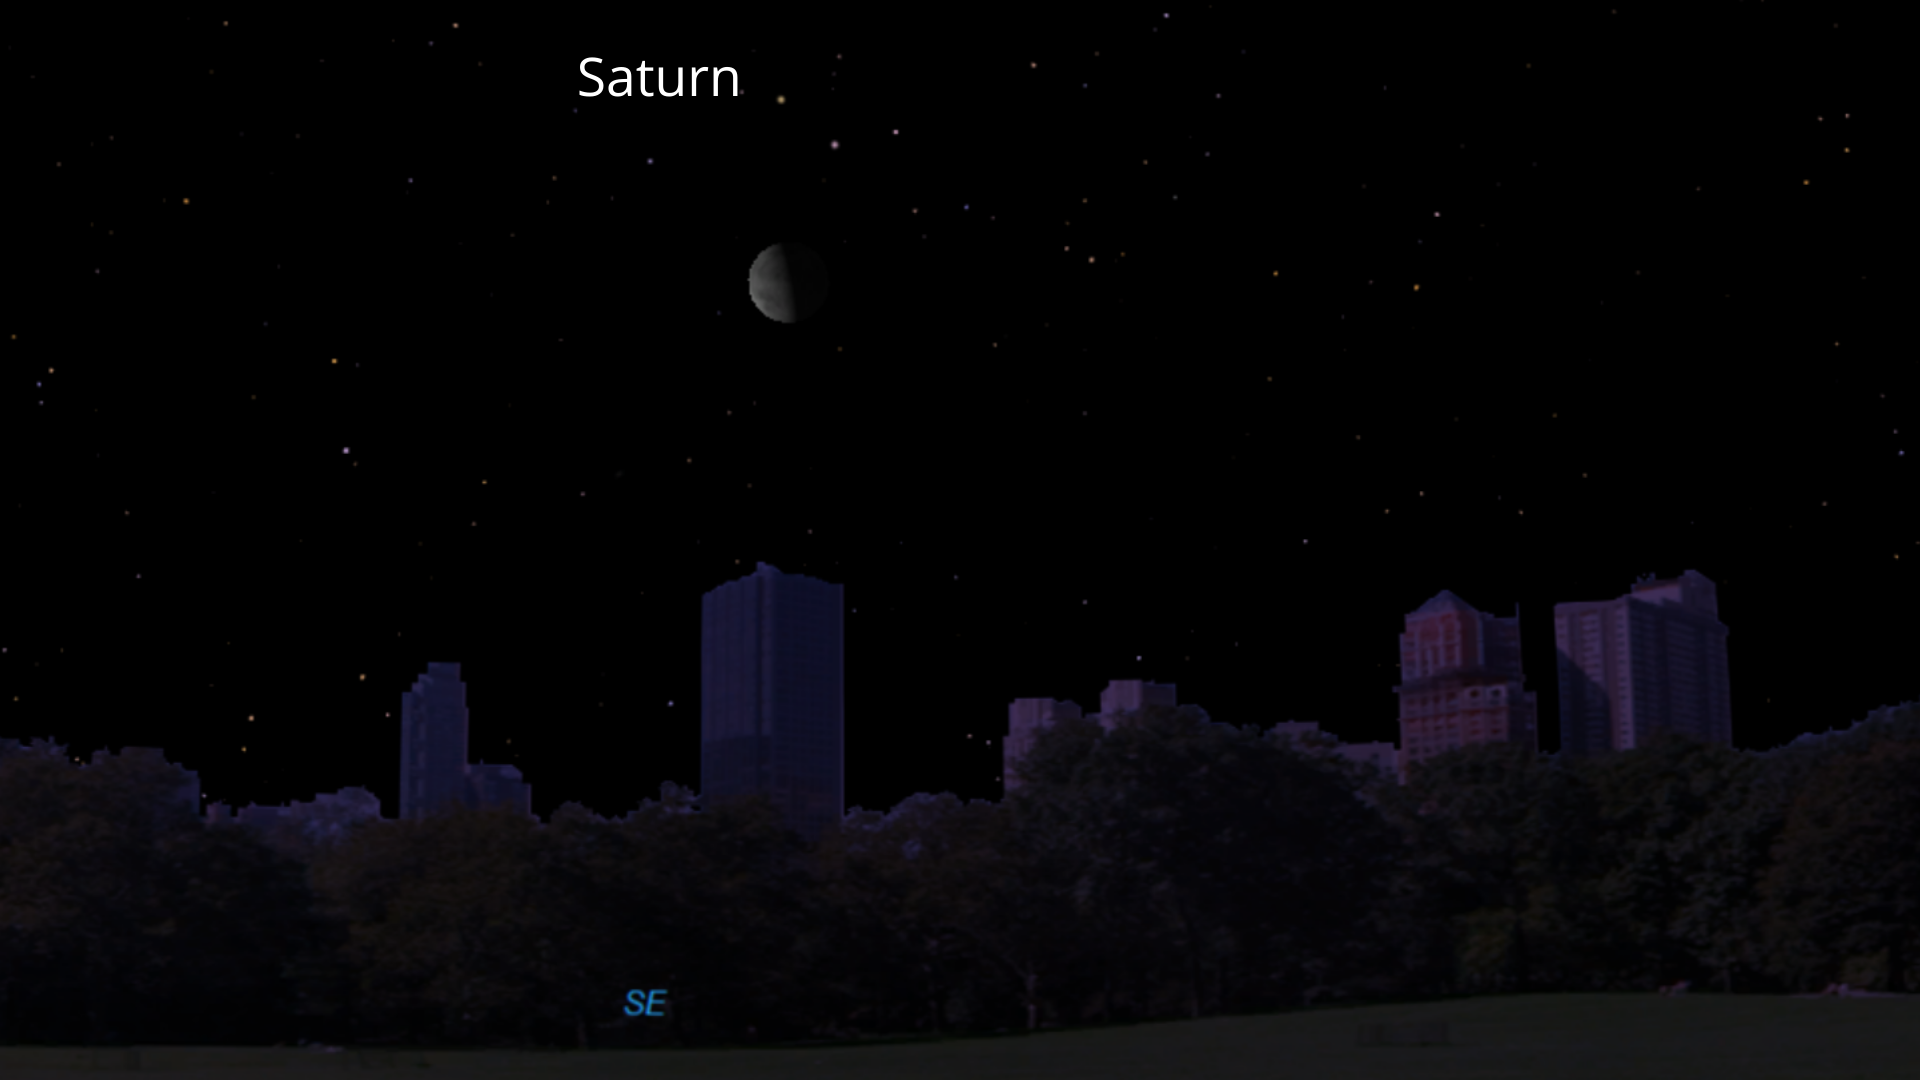 On May 22, Saturn will shine as a bright yellow-white star 5 degrees above the waning moon.